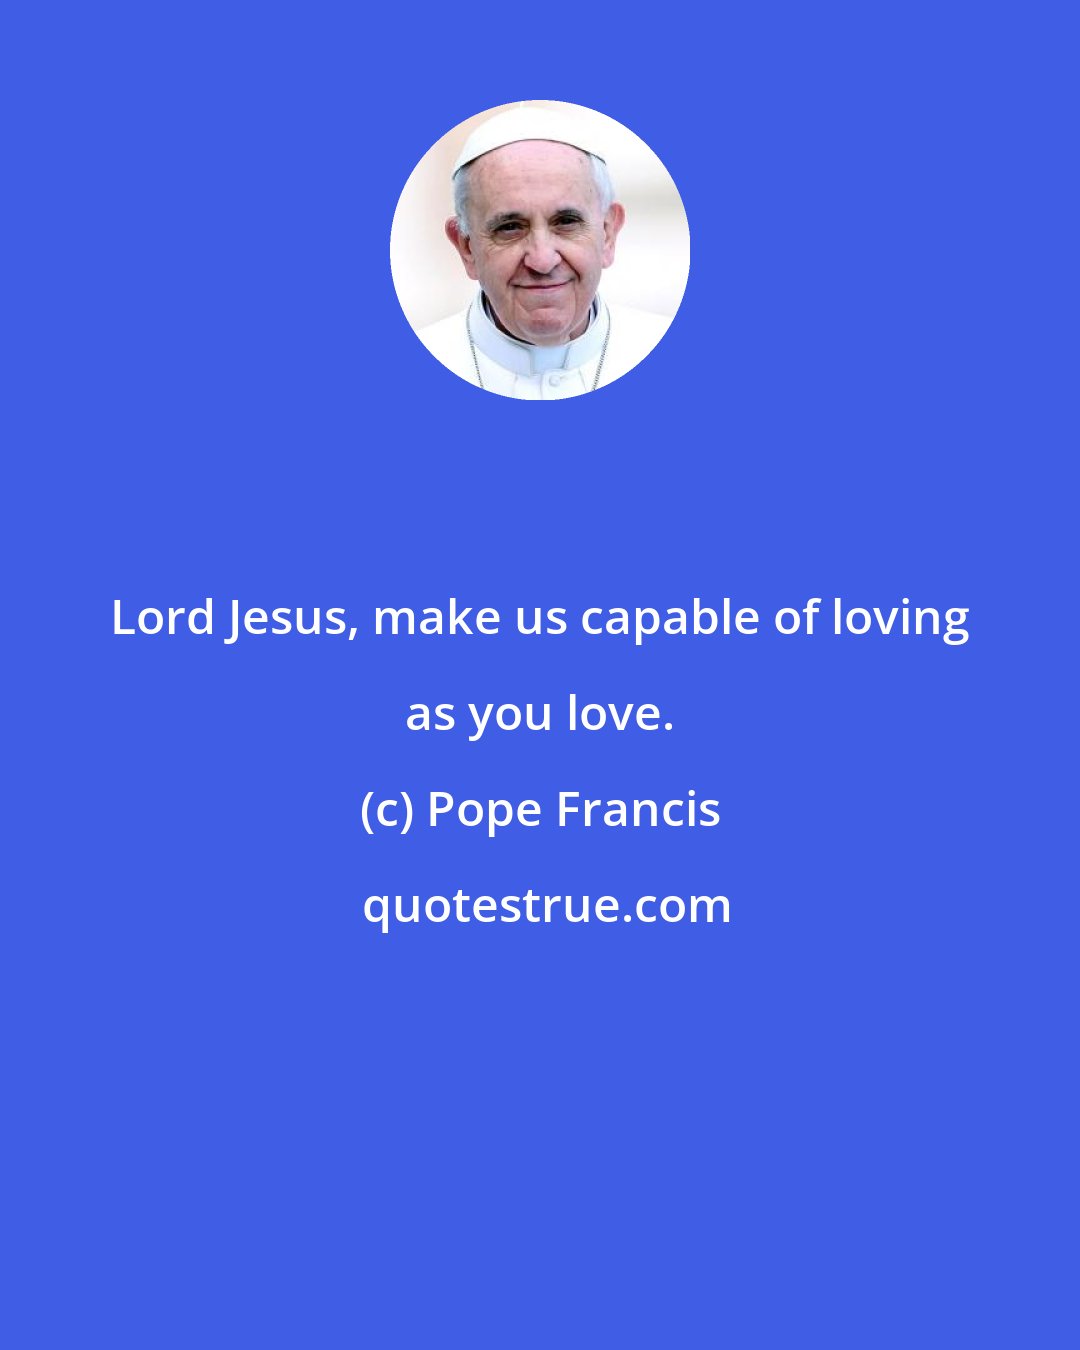 Pope Francis: Lord Jesus, make us capable of loving as you love.